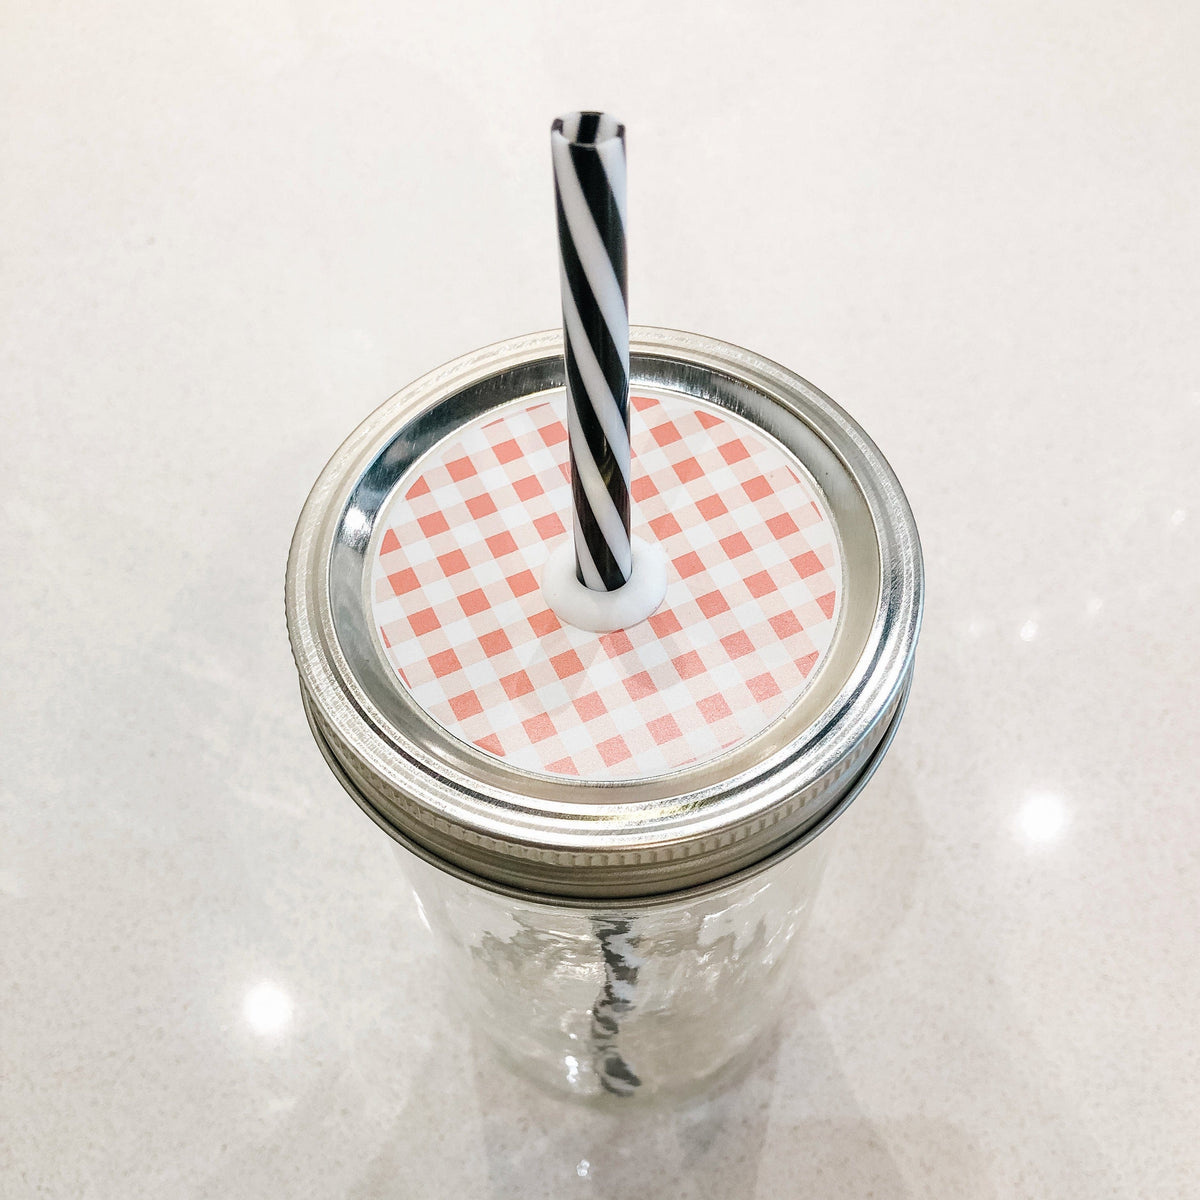 A silver lid on a regular mouth mason jar with white and peach checkered straw lid on top. It has a black and white striped straw and displayed on a white counter.